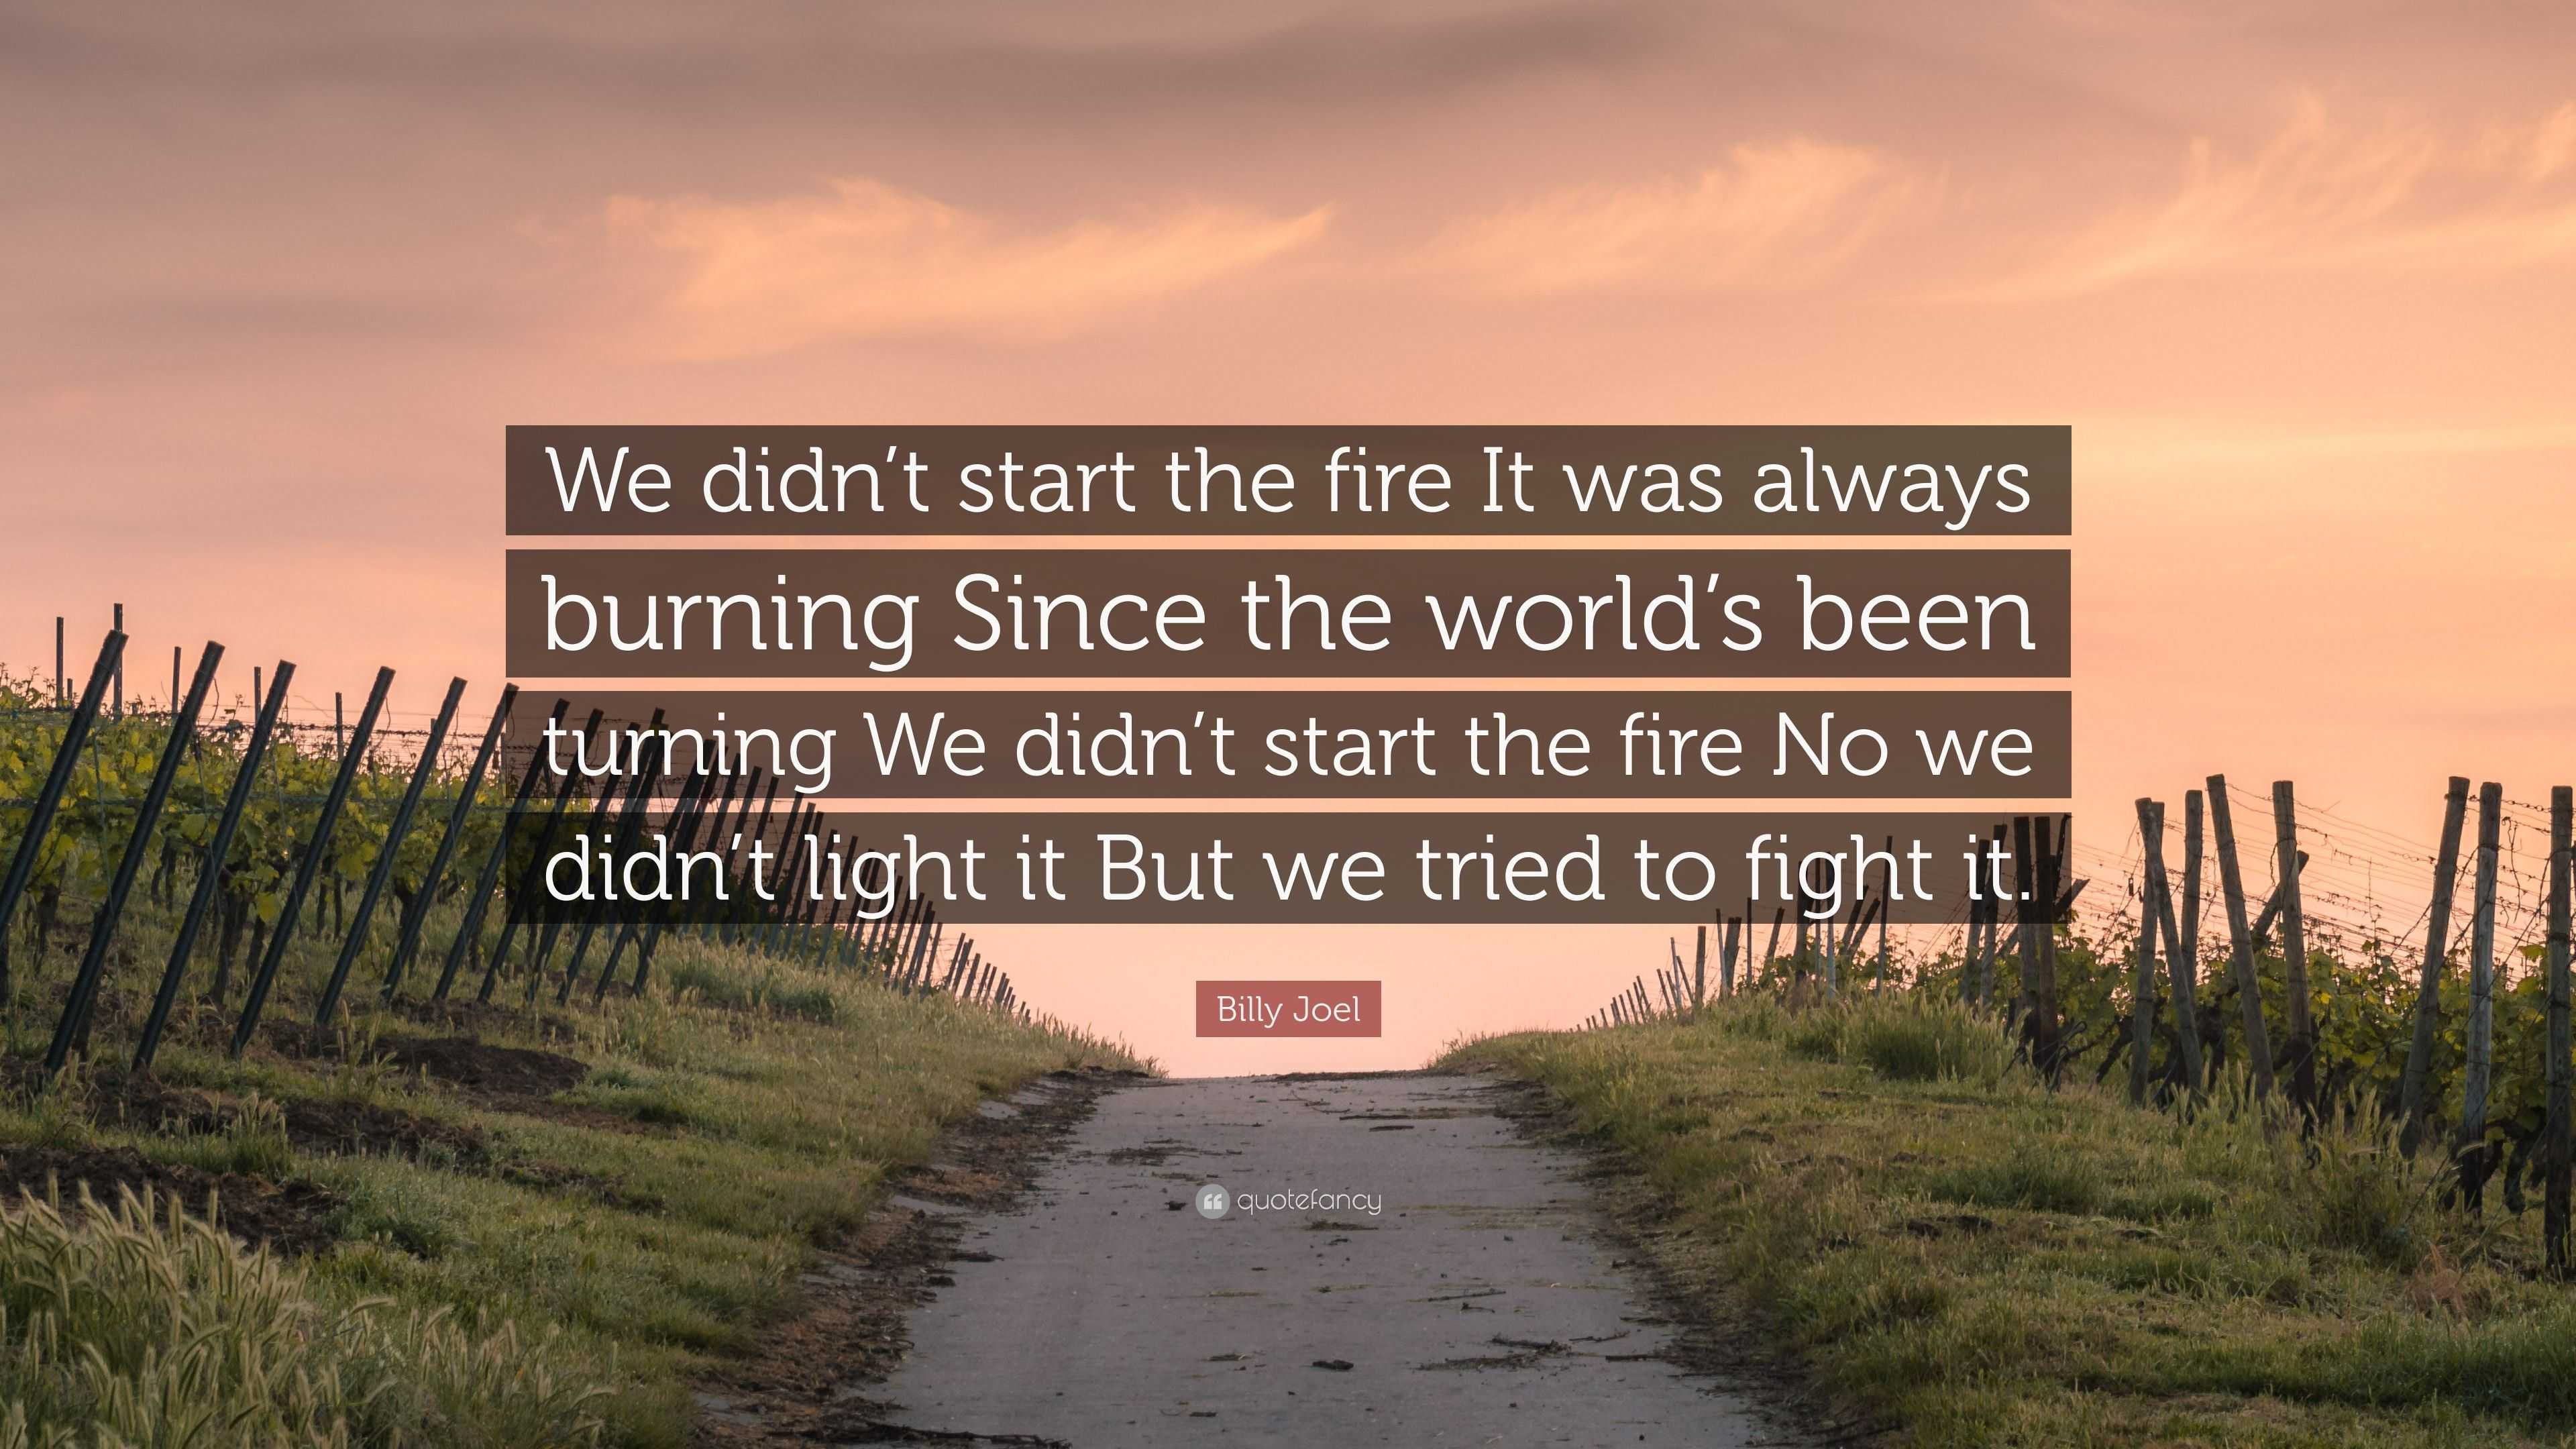 Billy Joel Quote “We didn’t start the fire It was always burning Since